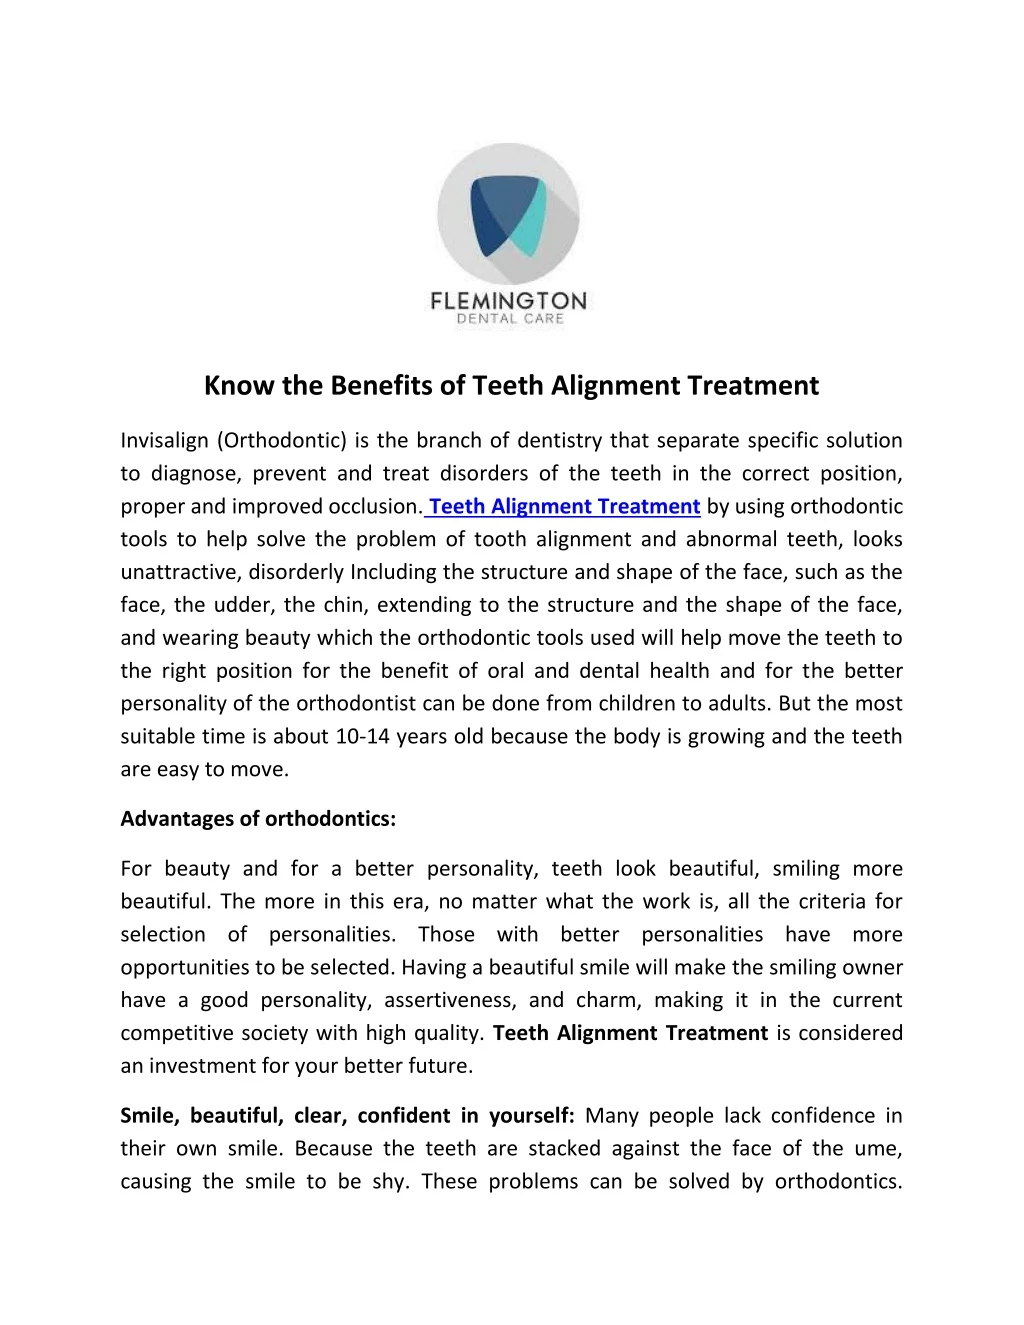 know the benefits of teeth alignment treatment